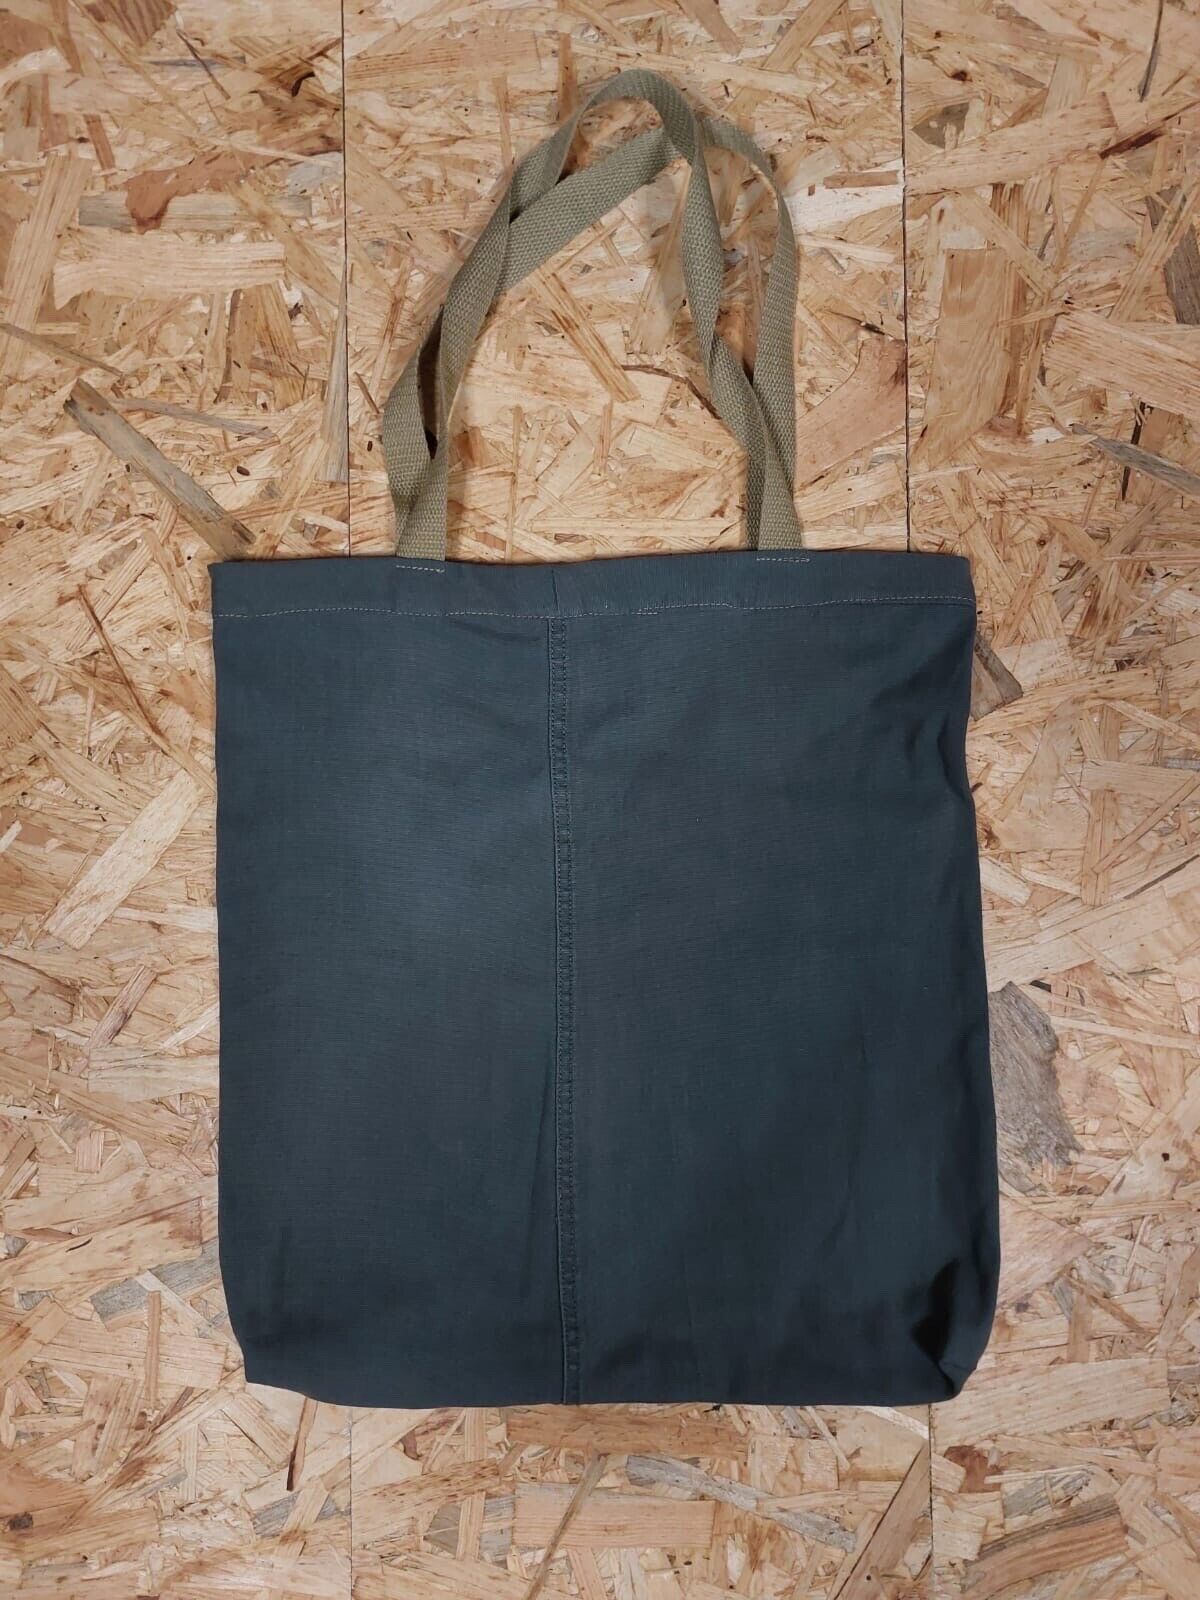 Denim Tote Jean Bag - Made From Levi Denim Blue Cotton - Upcycled